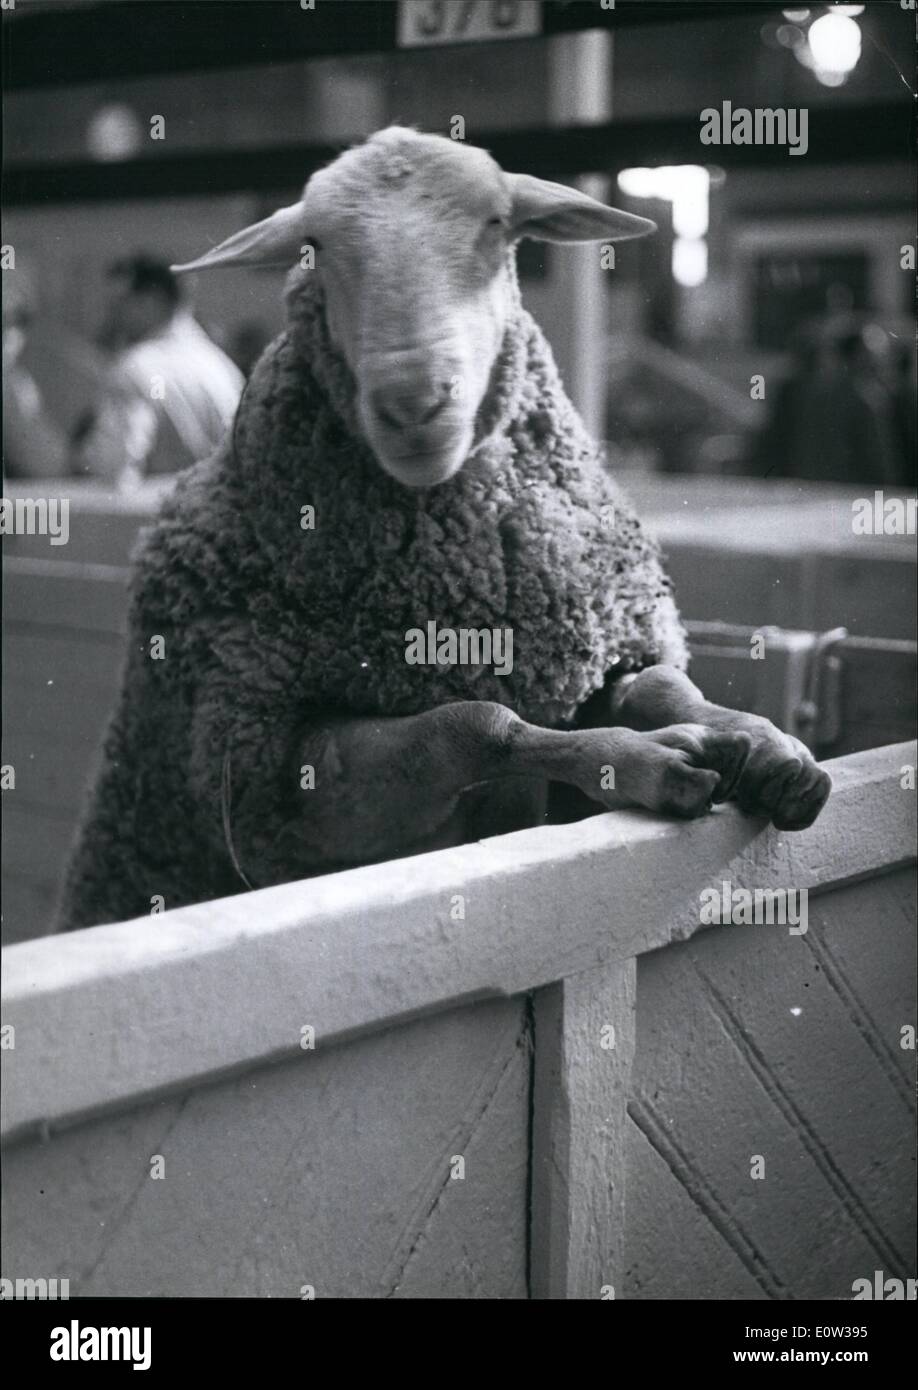 Mar. 03, 1961 - Sheep Plays 'Peeping Tom': Photo shows An Amusing Snapshot of a Sheep taking a look around at the Agricultiral show just opened in Paris. Stock Photo